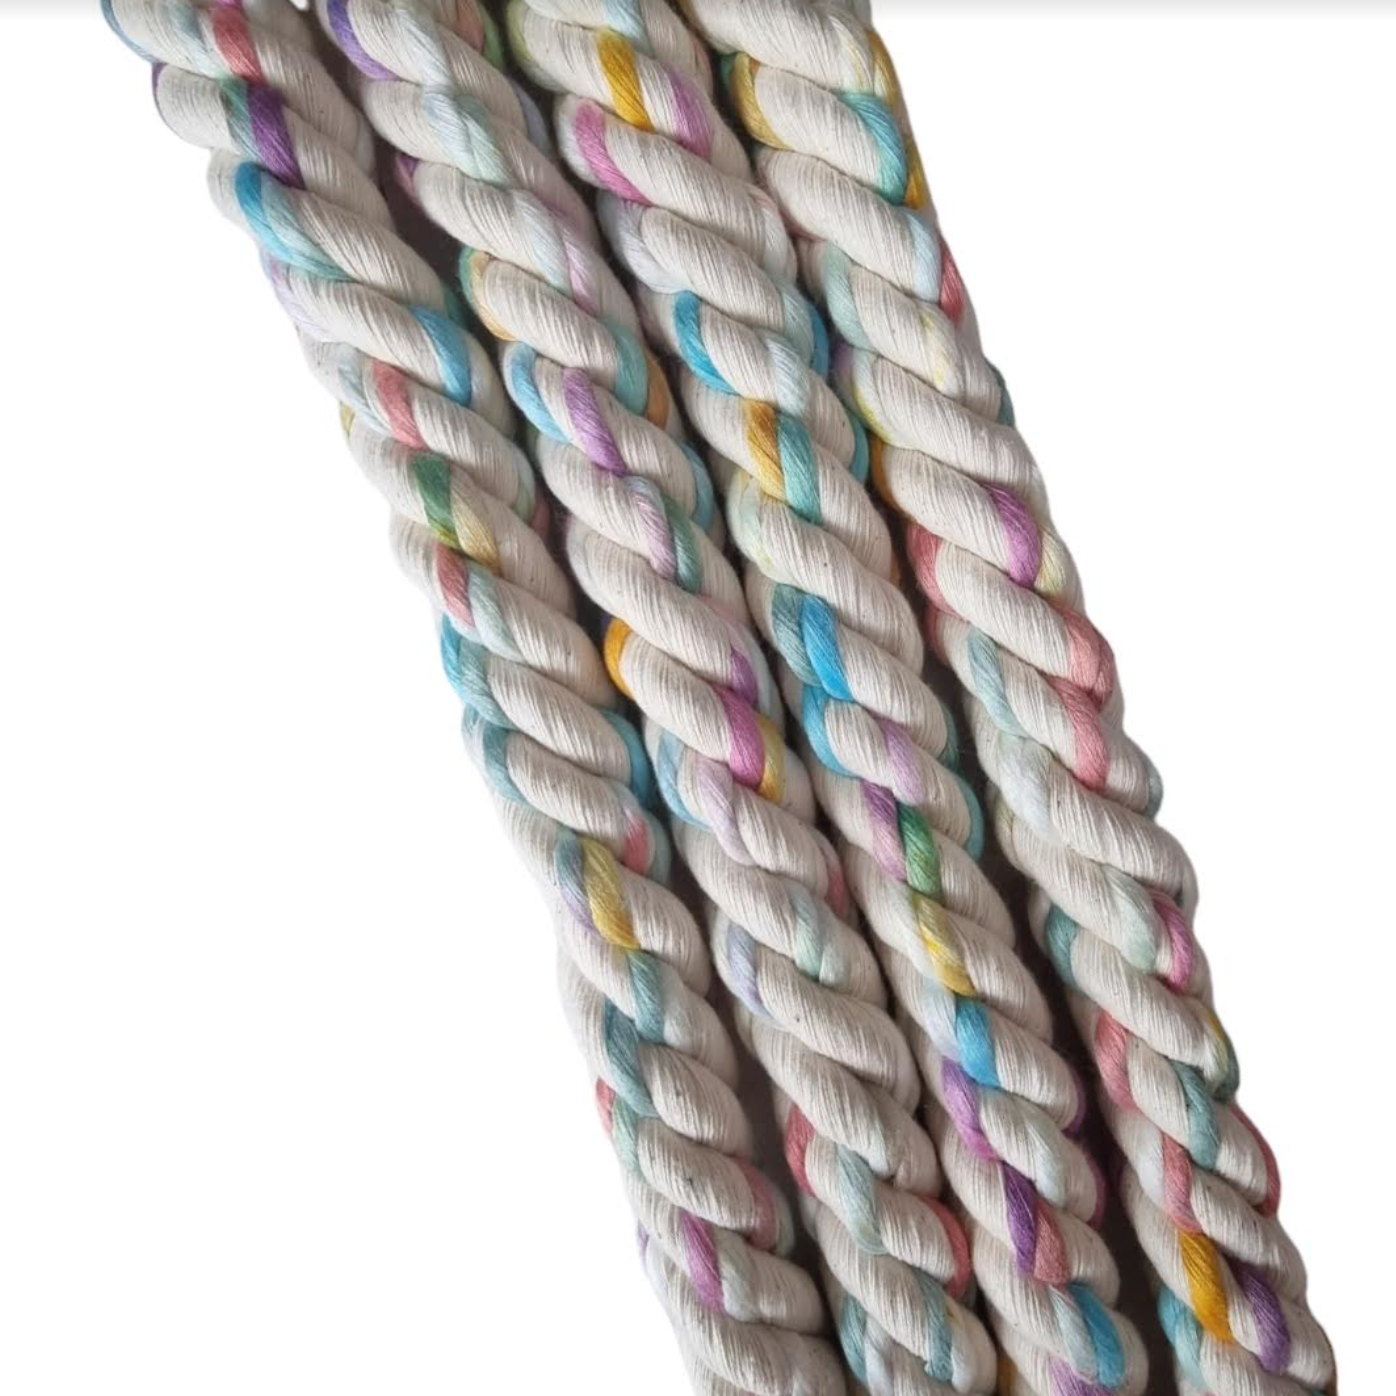 20mm Colorfull COTTON Rope